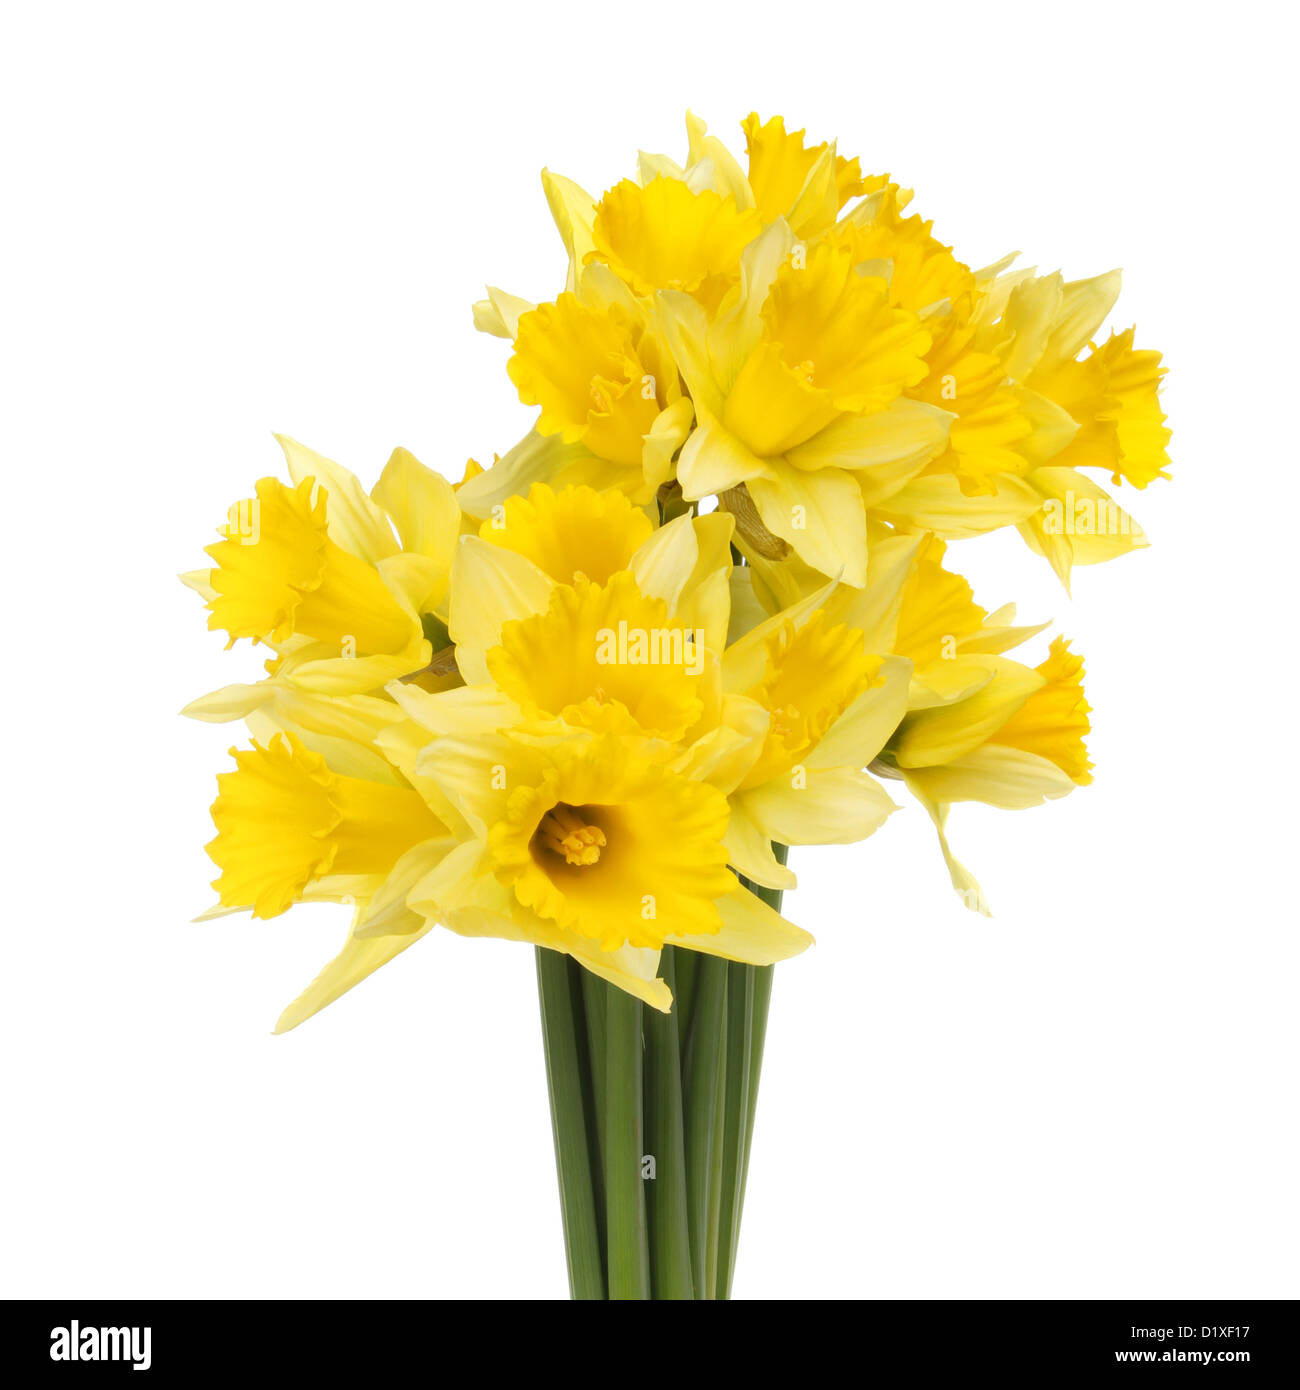 Bunch of golden yellow daffodil flowers isolated against white Stock Photo